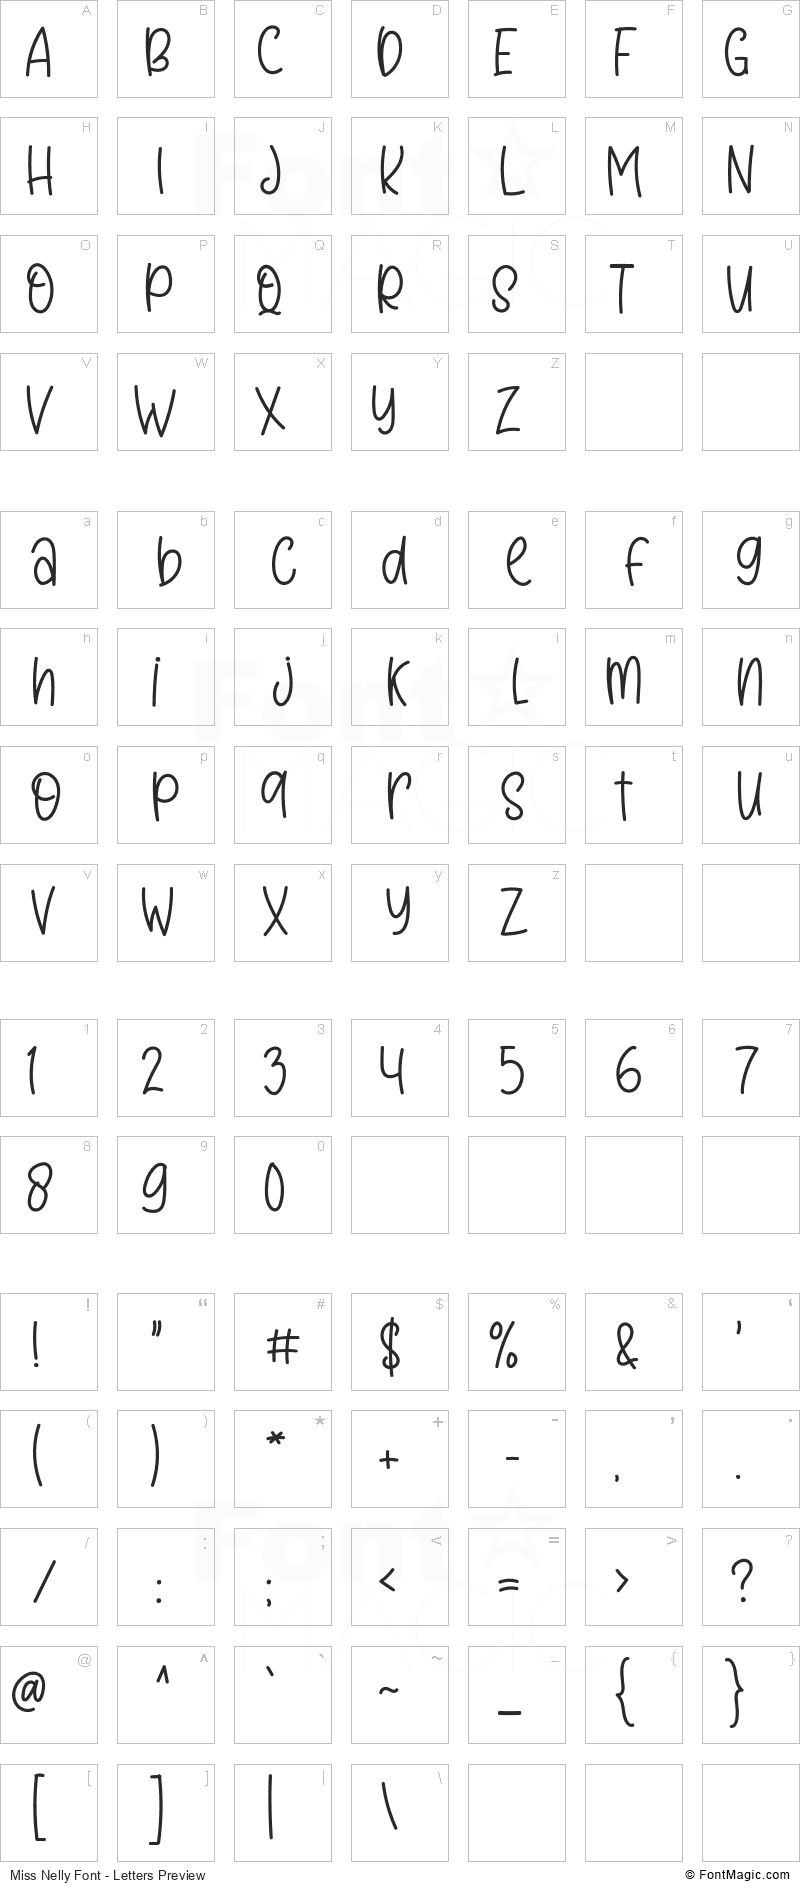 Miss Nelly Font - All Latters Preview Chart